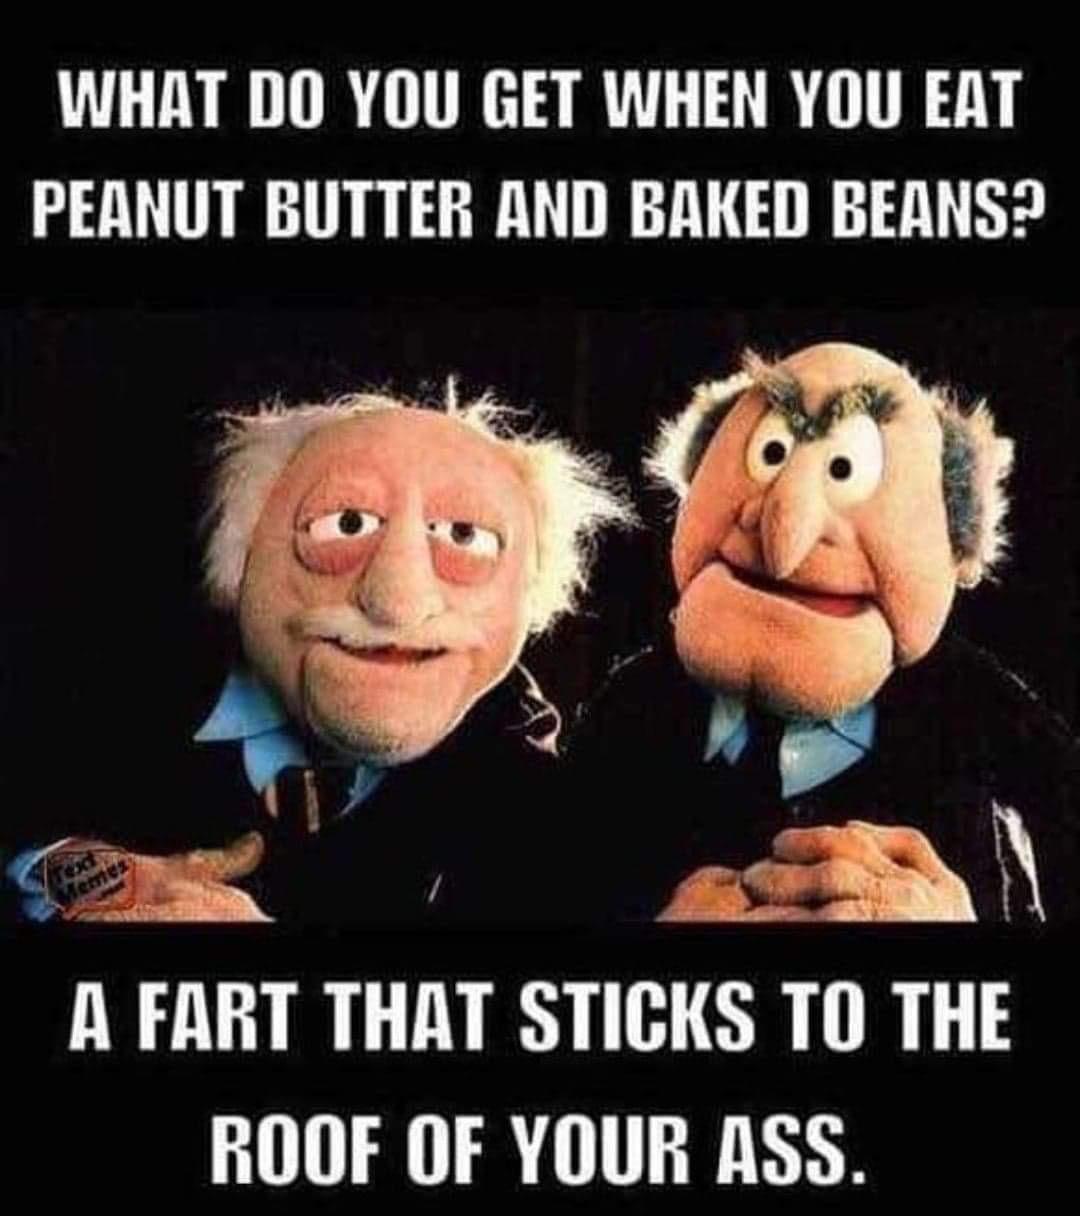 do you get when you eat peanut butter and baked beans - What Do You Get When You Eat Peanut Butter And Baked Beans? A Fart That Sticks To The Roof Of Your Ass.